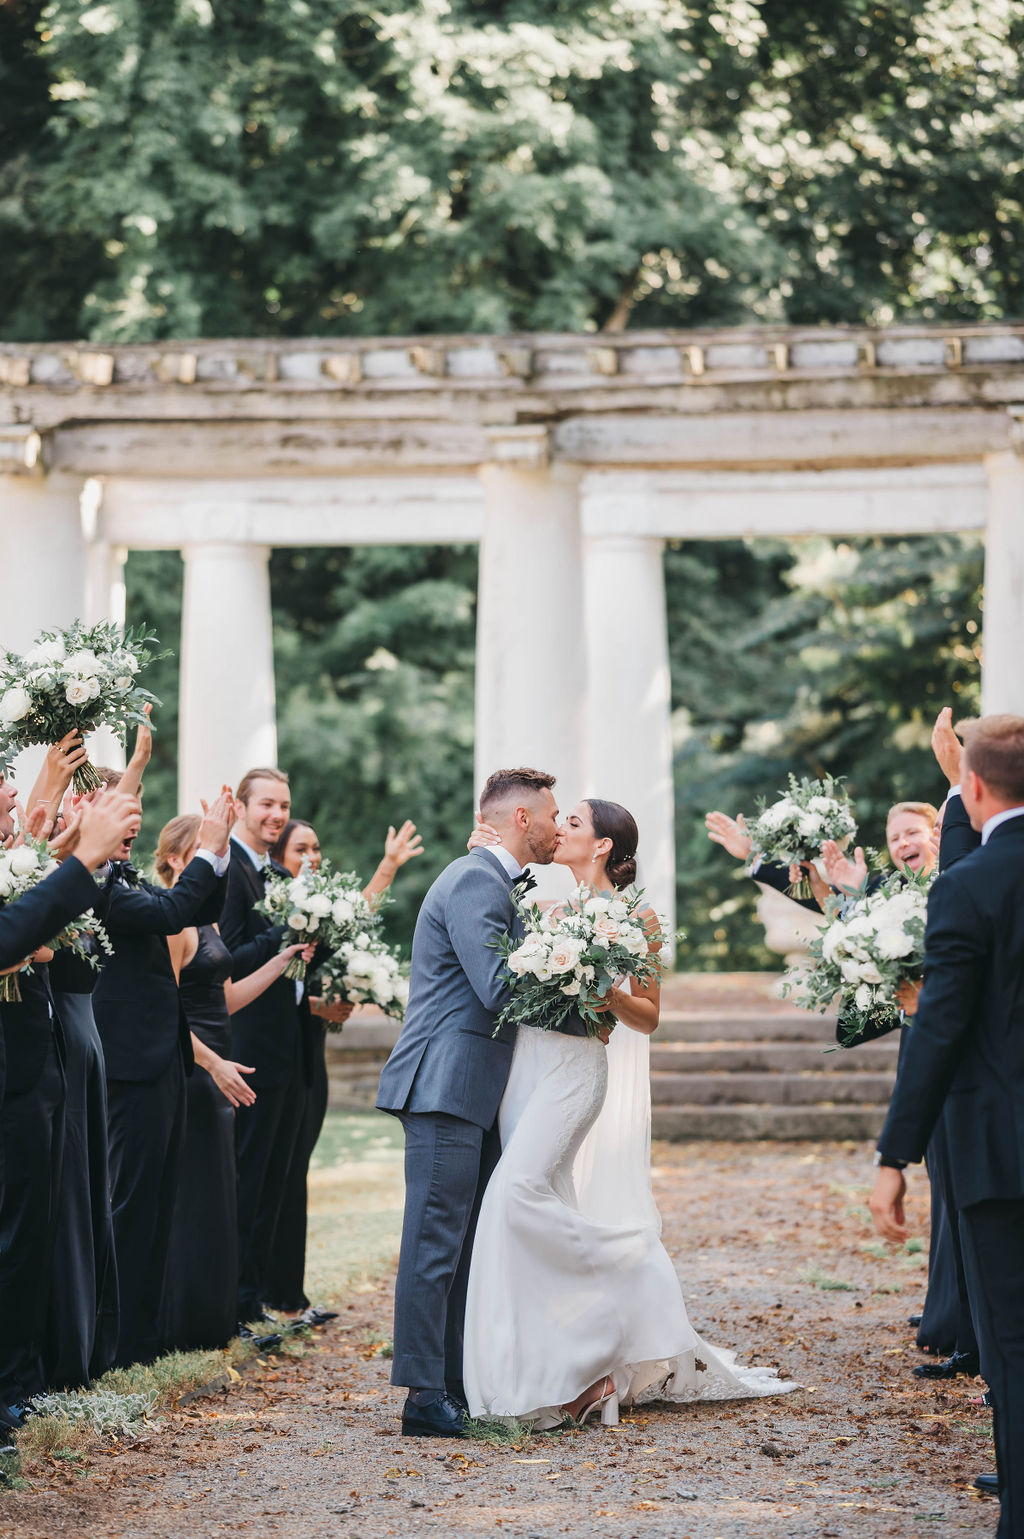 Bridal party in a black and white color palette surrounding bride and groom as they kiss under a pergola backdrop